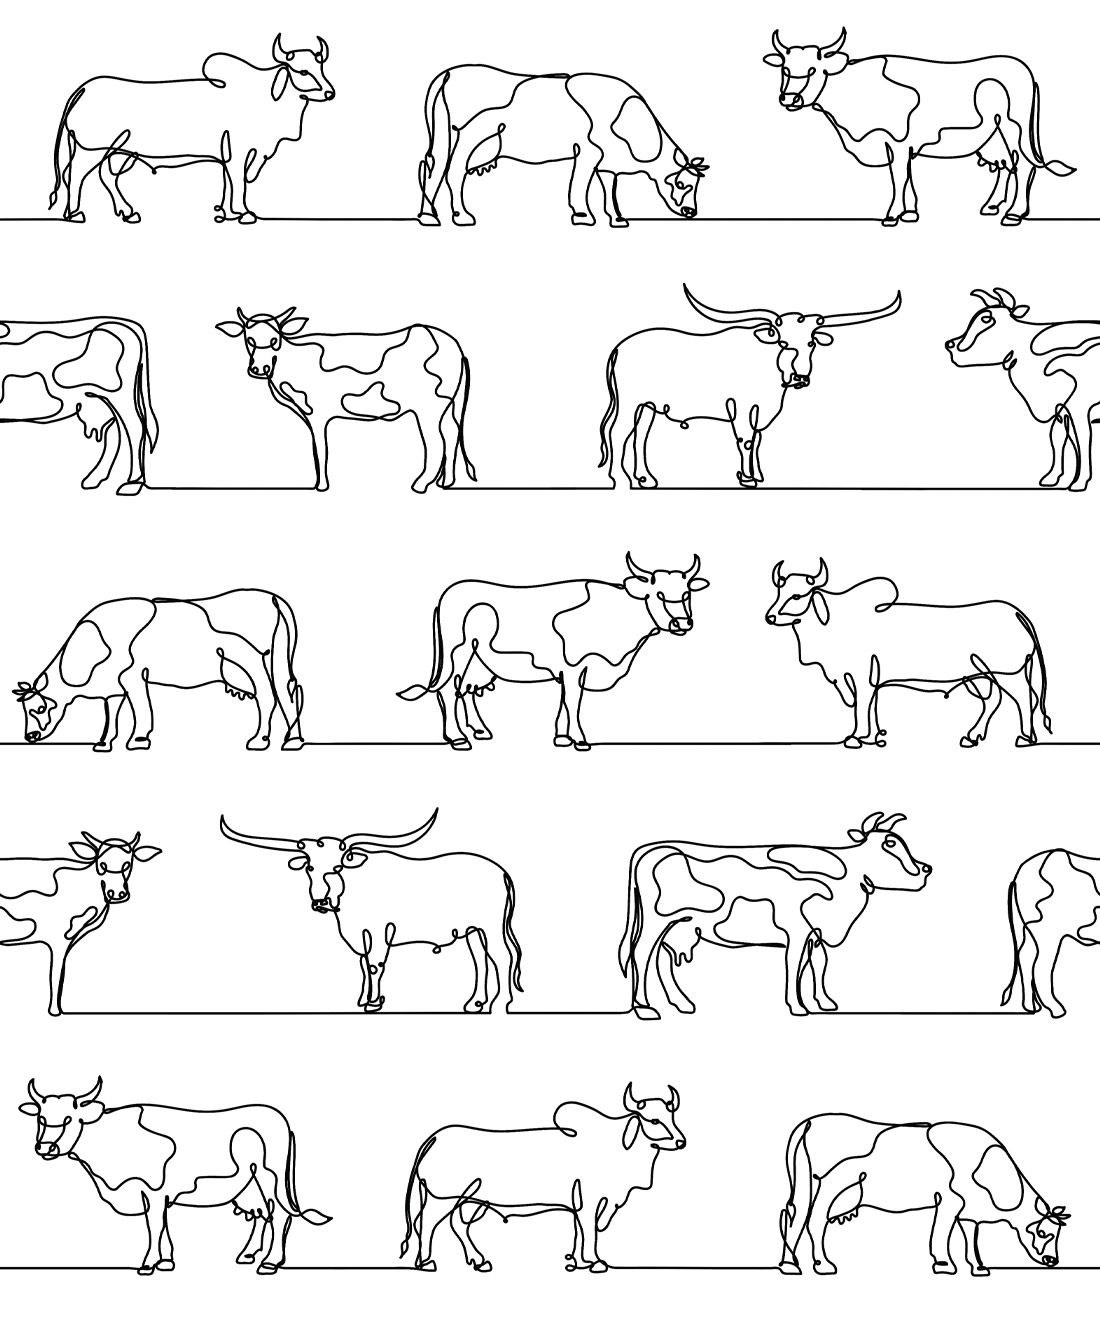 The Herd Wallpaper • Cow, Cattle, Farm Animals • White • Swatch